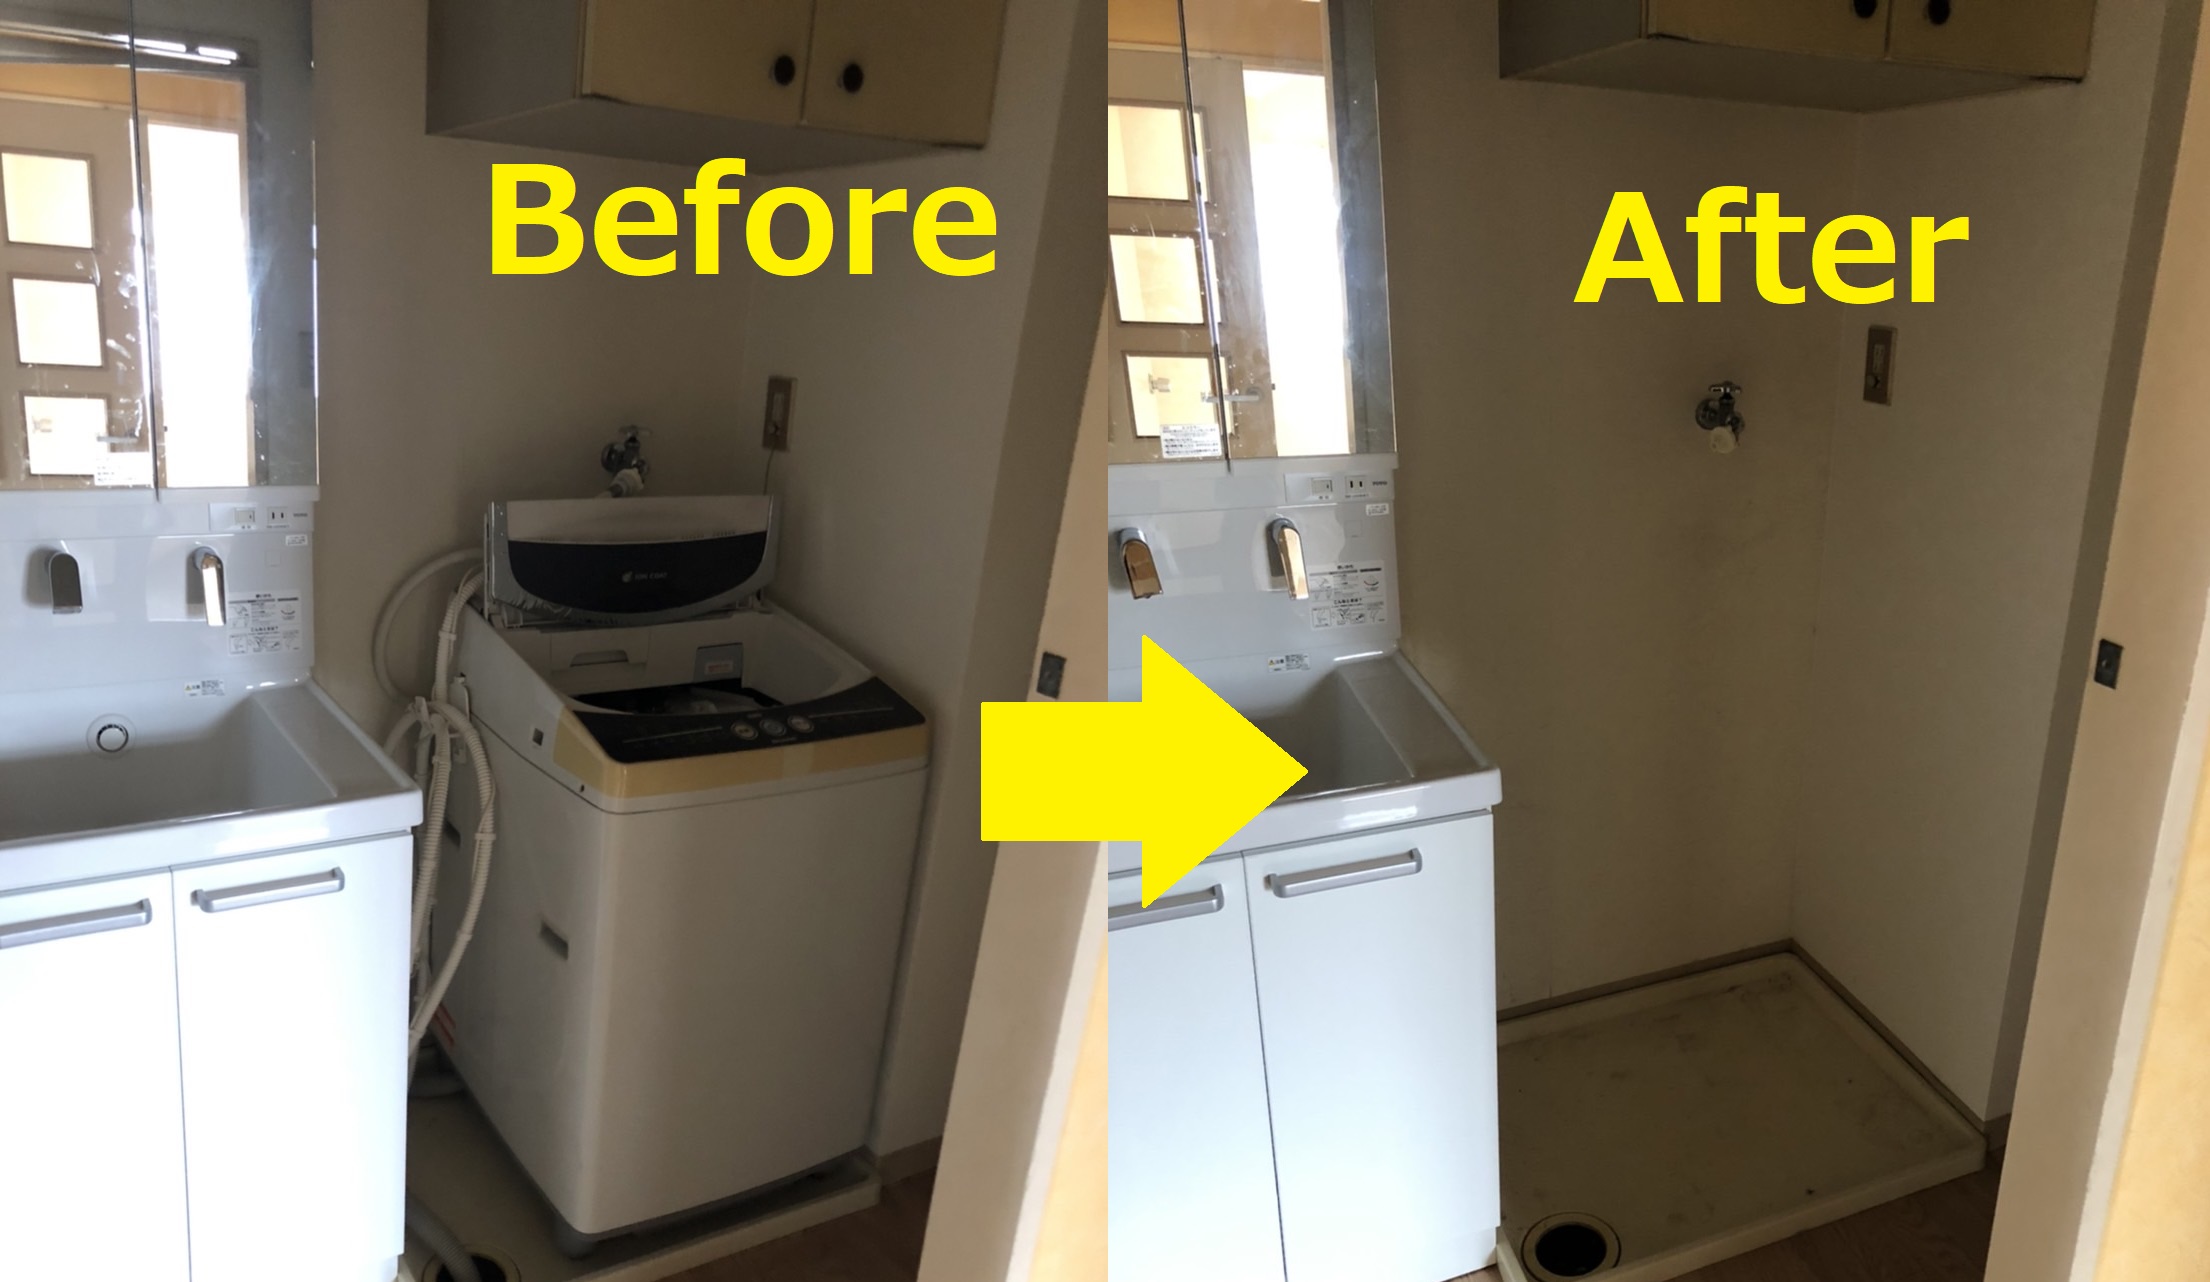 Washing machine-Cleanup company-Before after